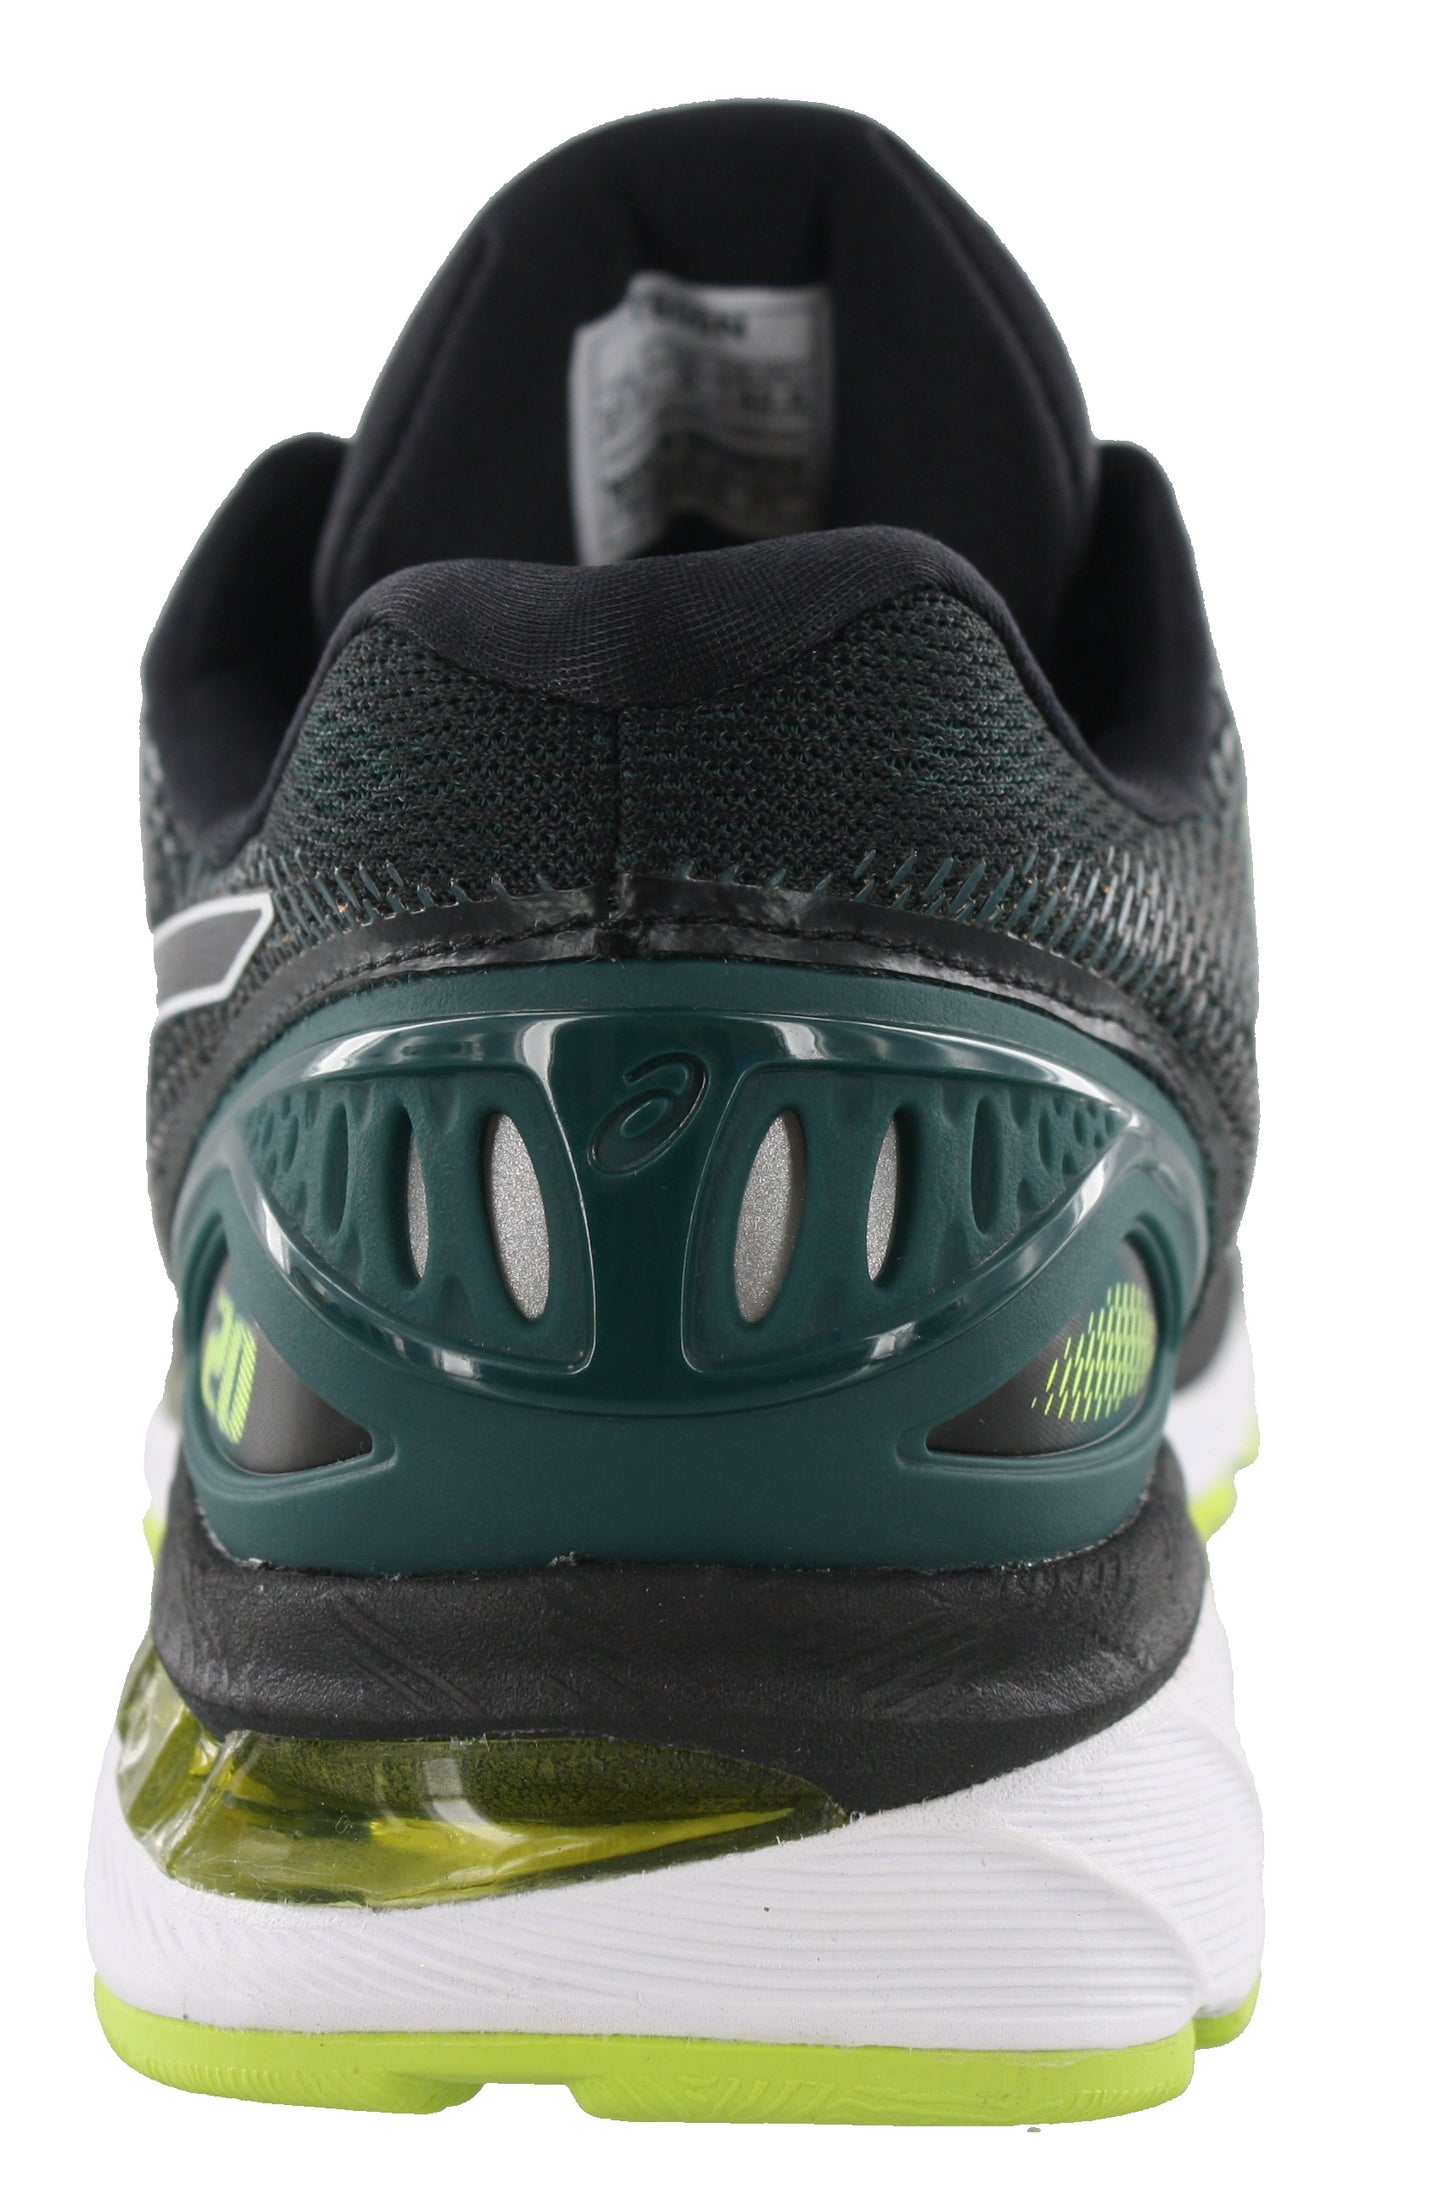 
                  
                    Back of Black with Neon Lime, Forest Green, and White accents ASICS Men Walking Trail Cushioned Running Shoes Gel Nimbus 20
                  
                